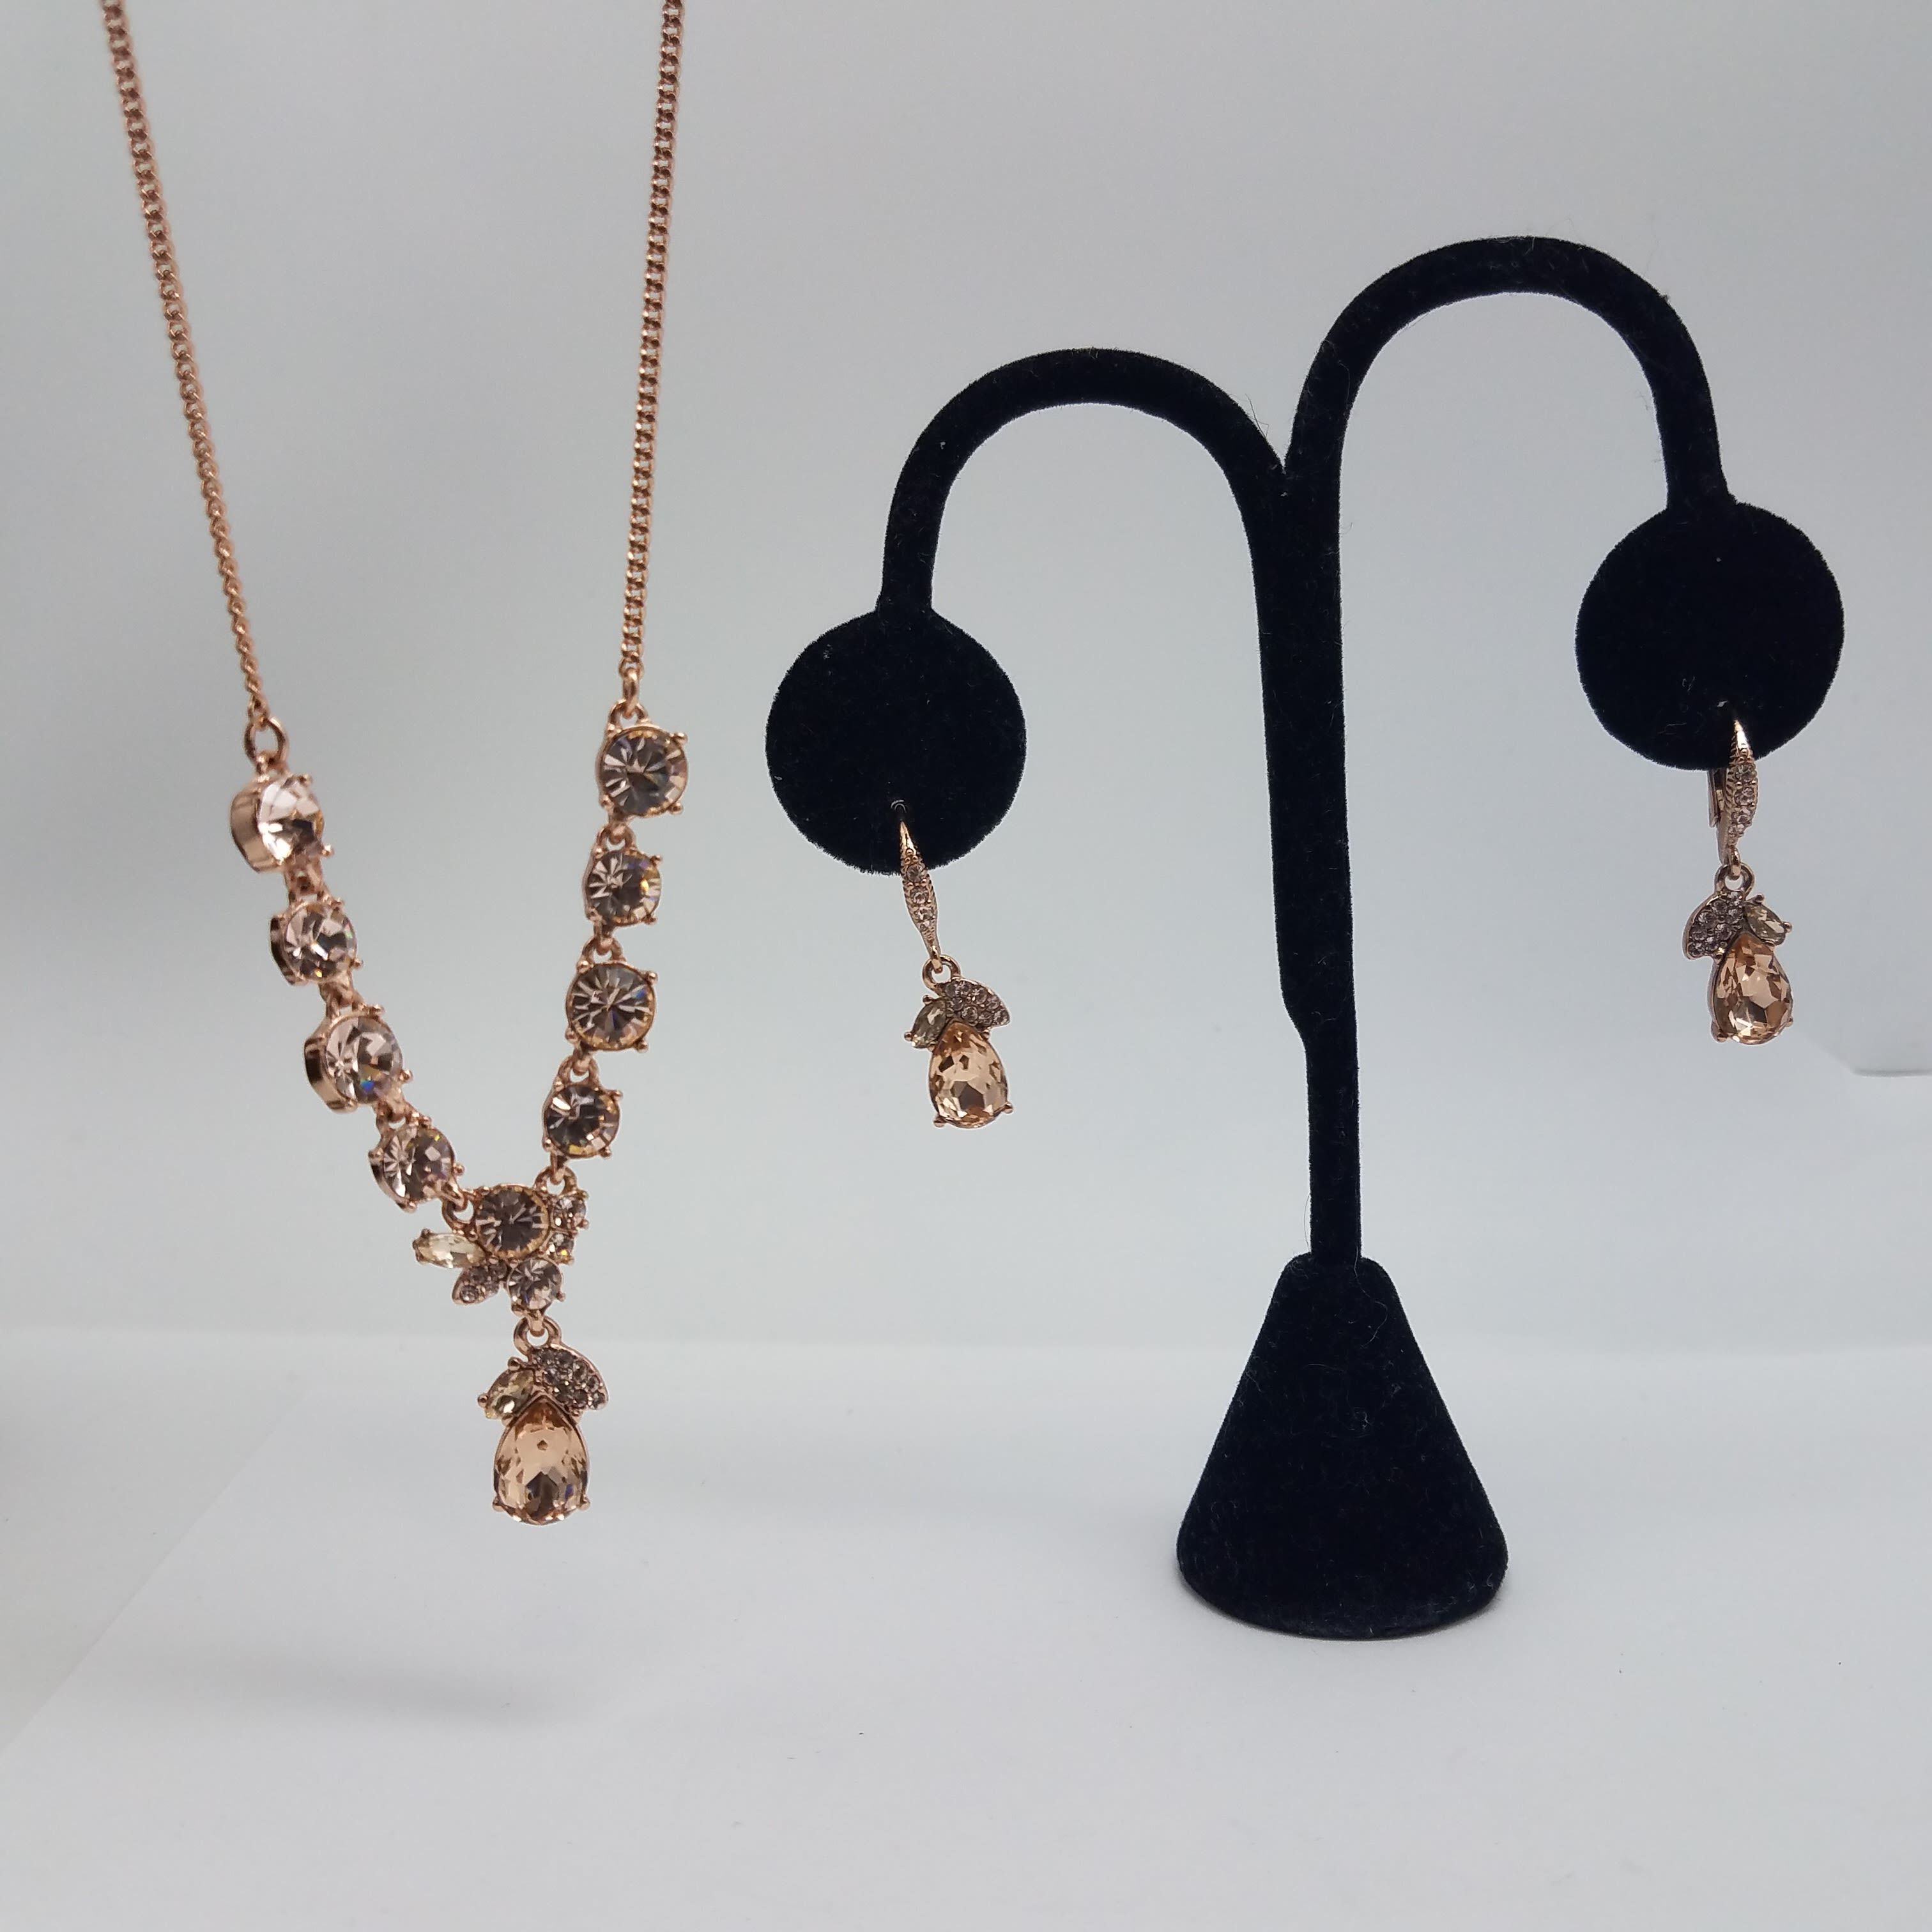 Givenchy | Jewelry | Givenchy Rose Gold Tone Crystal Y Lariat Necklace |  Poshmark